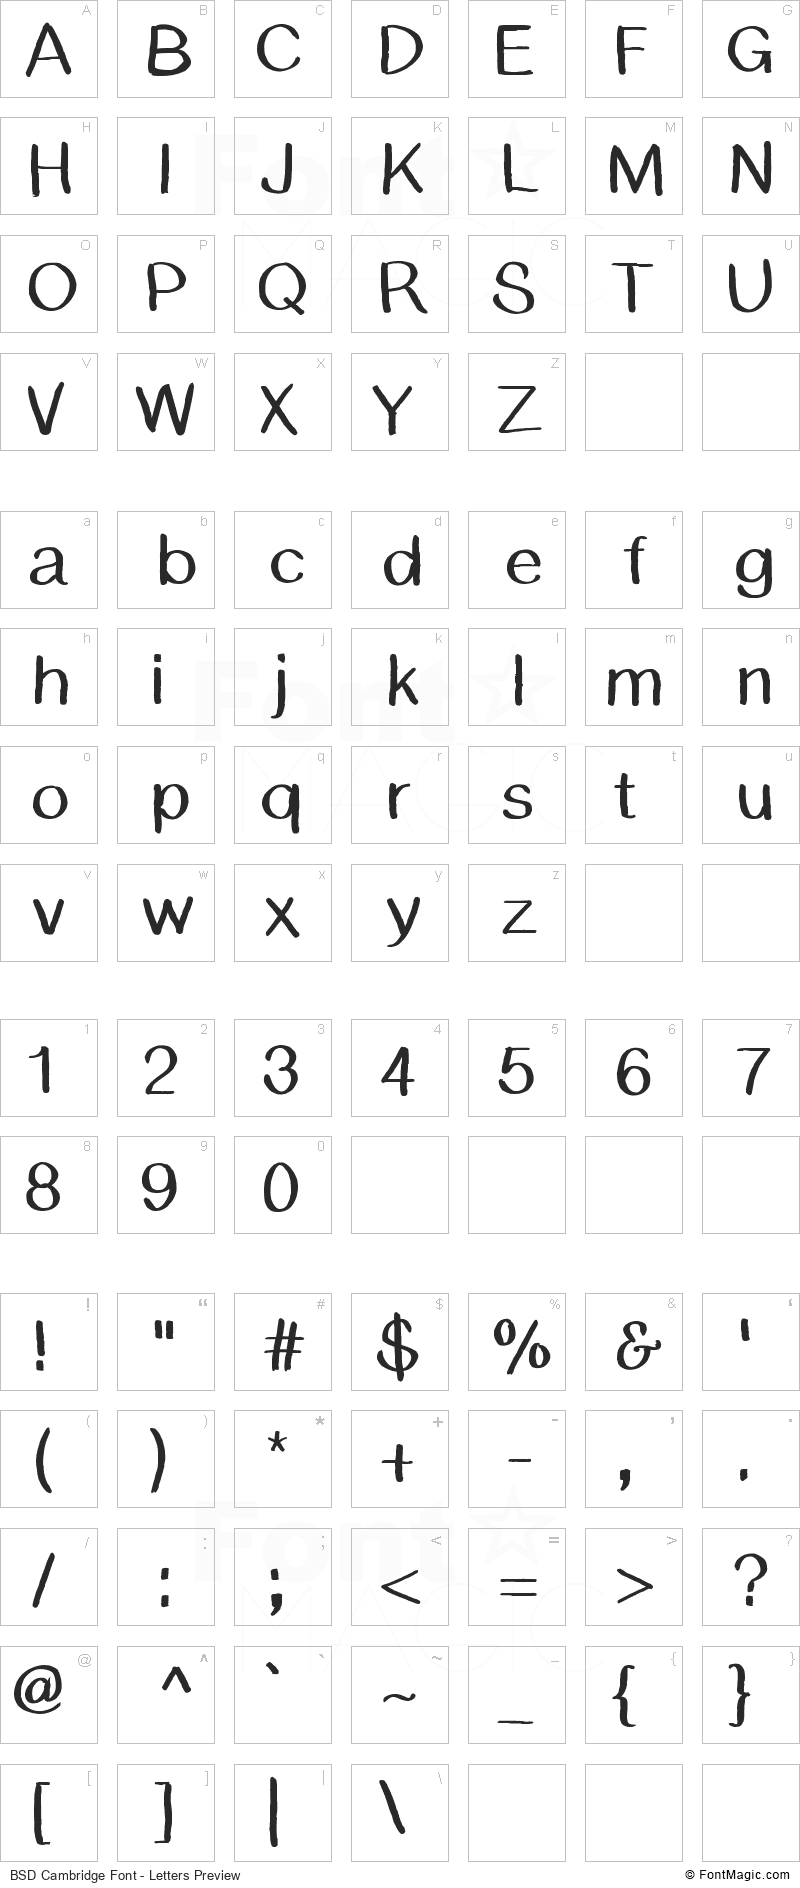 BSD Cambridge Font - All Latters Preview Chart